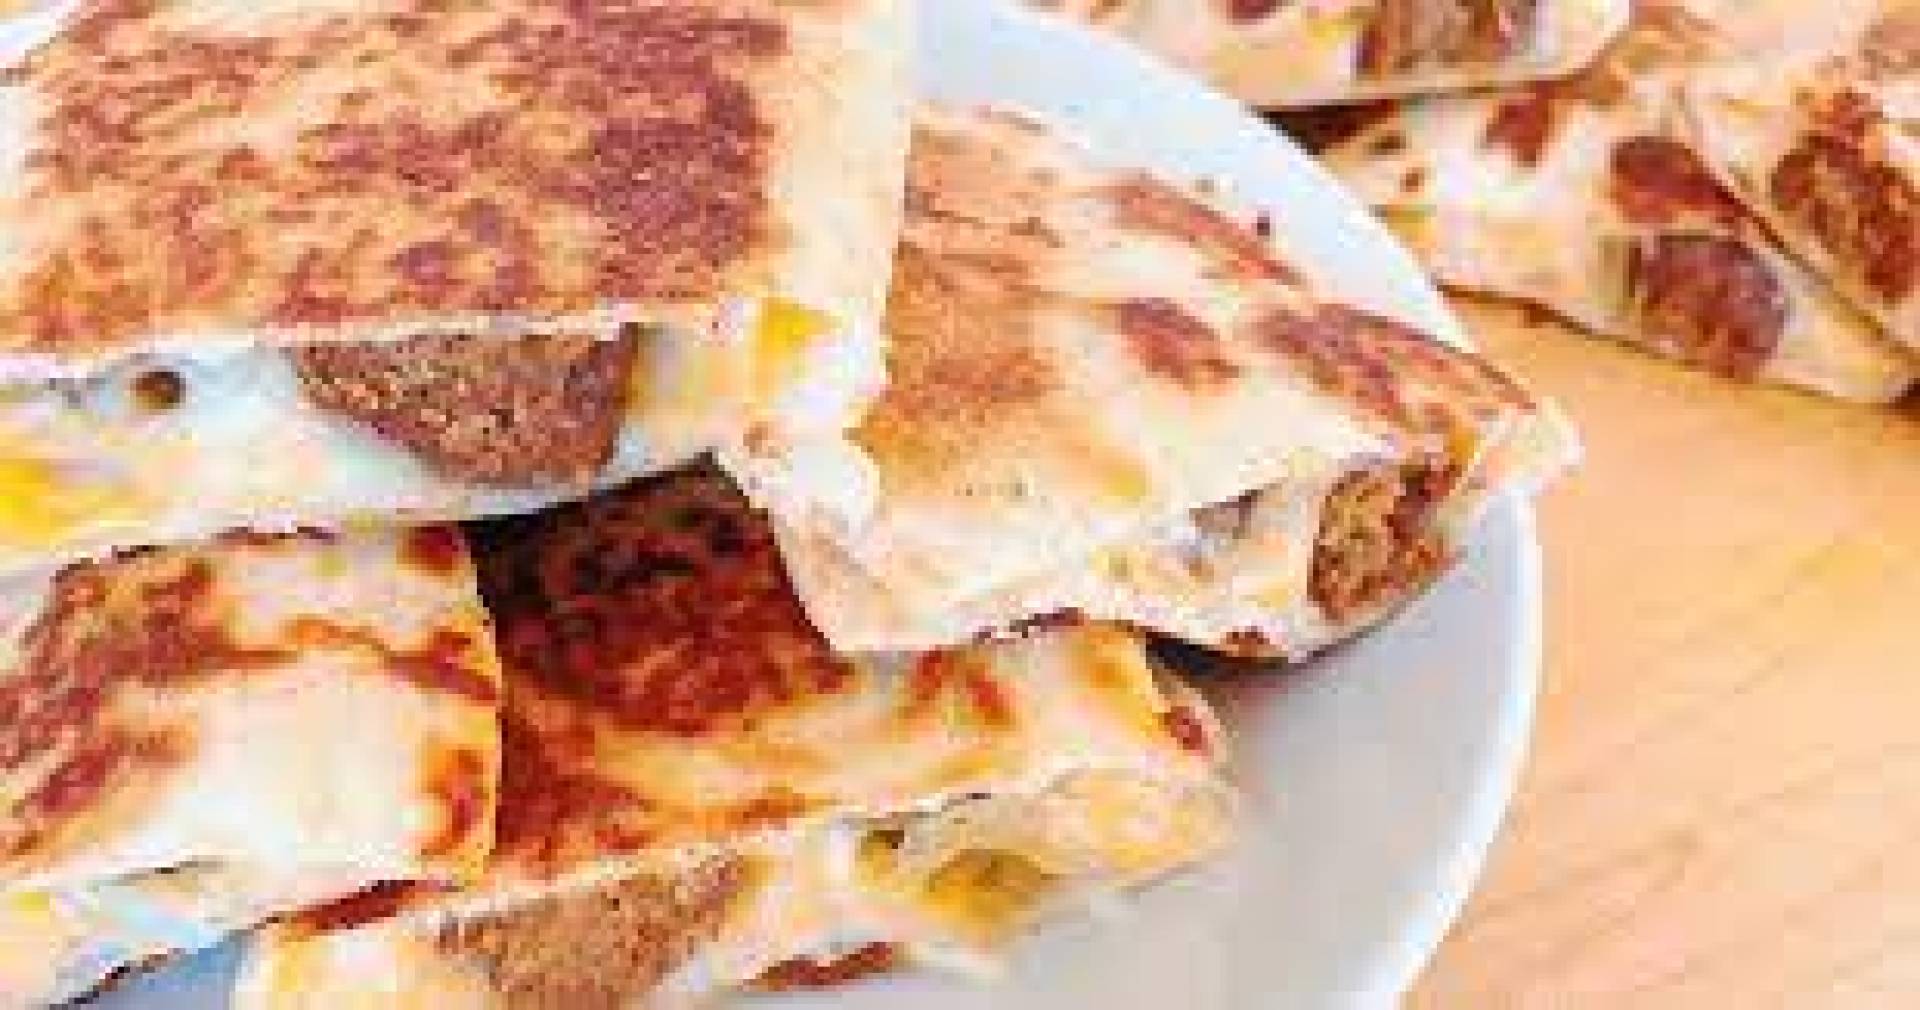 Meatball Quesadilla on 0 Net Carb Tortillas with Premium Marinara and Provolone - Low Fat